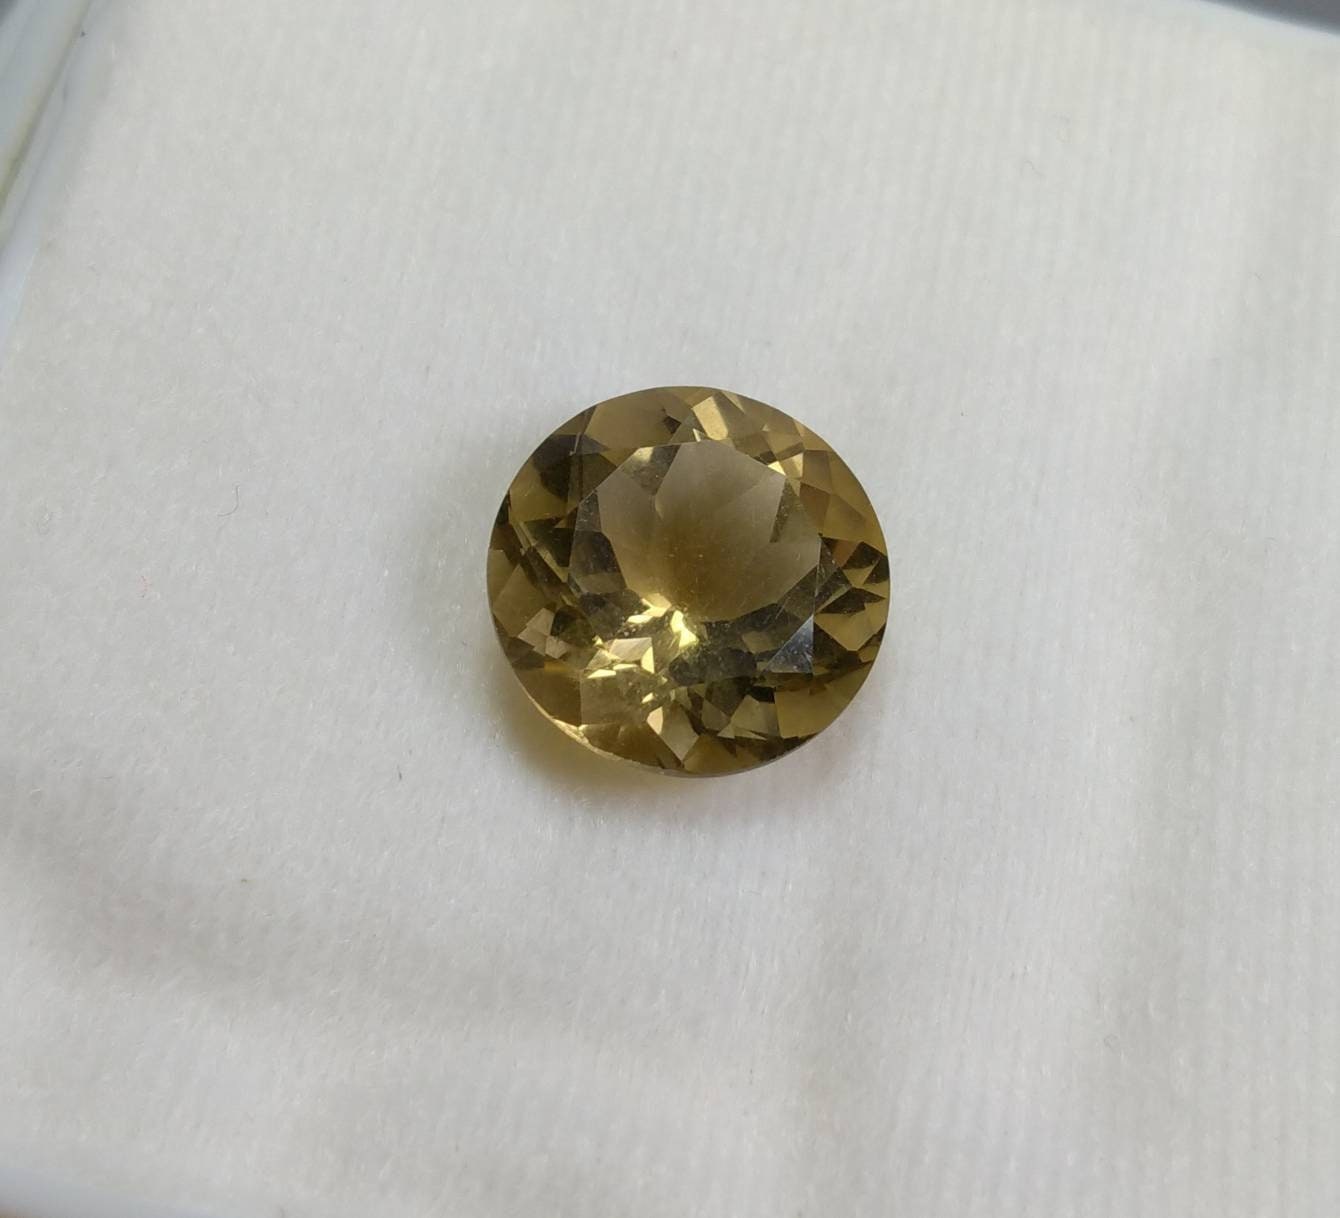 ARSAA GEMS AND MINERALSNatural top quality beautiful 9 carats round shape faceted citrine gem - Premium  from ARSAA GEMS AND MINERALS - Just $27.00! Shop now at ARSAA GEMS AND MINERALS